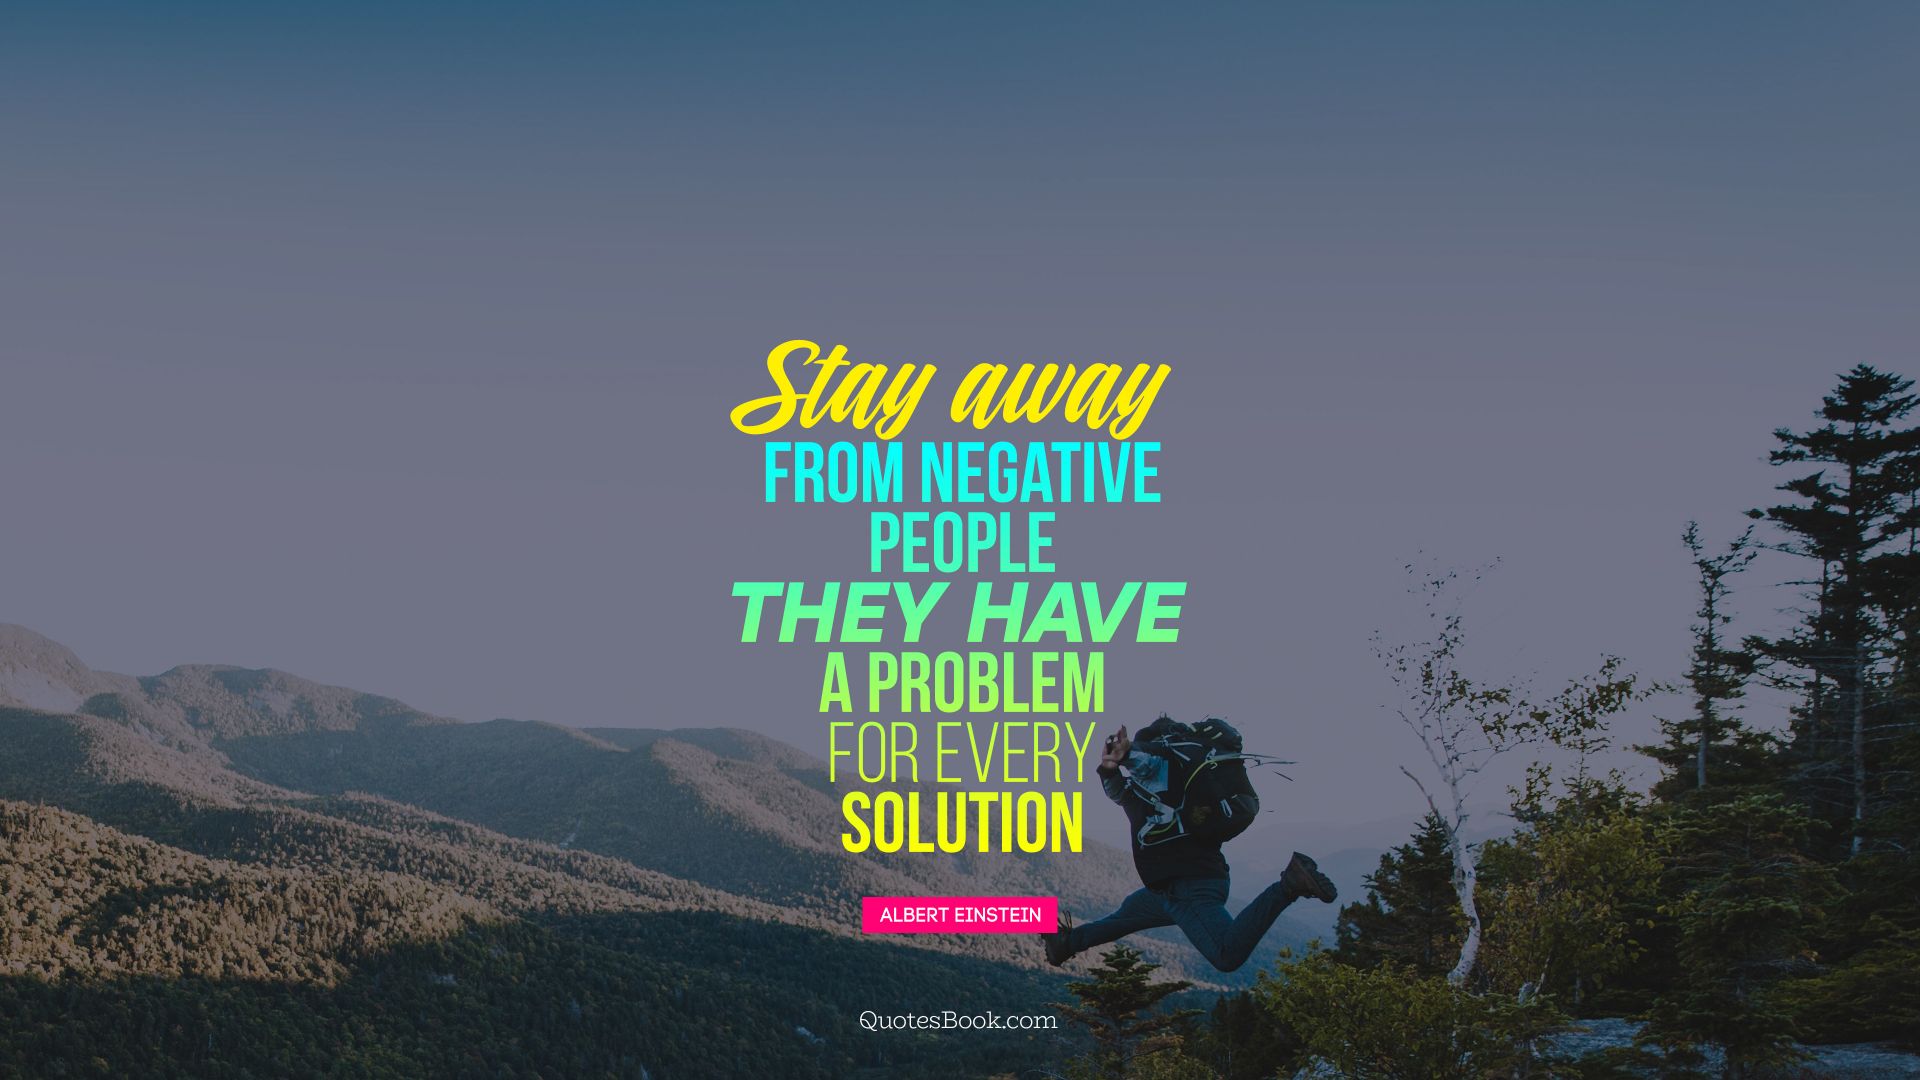 Stay away from negative people. They have a problem for every Solution. - Quote by Albert Einstein